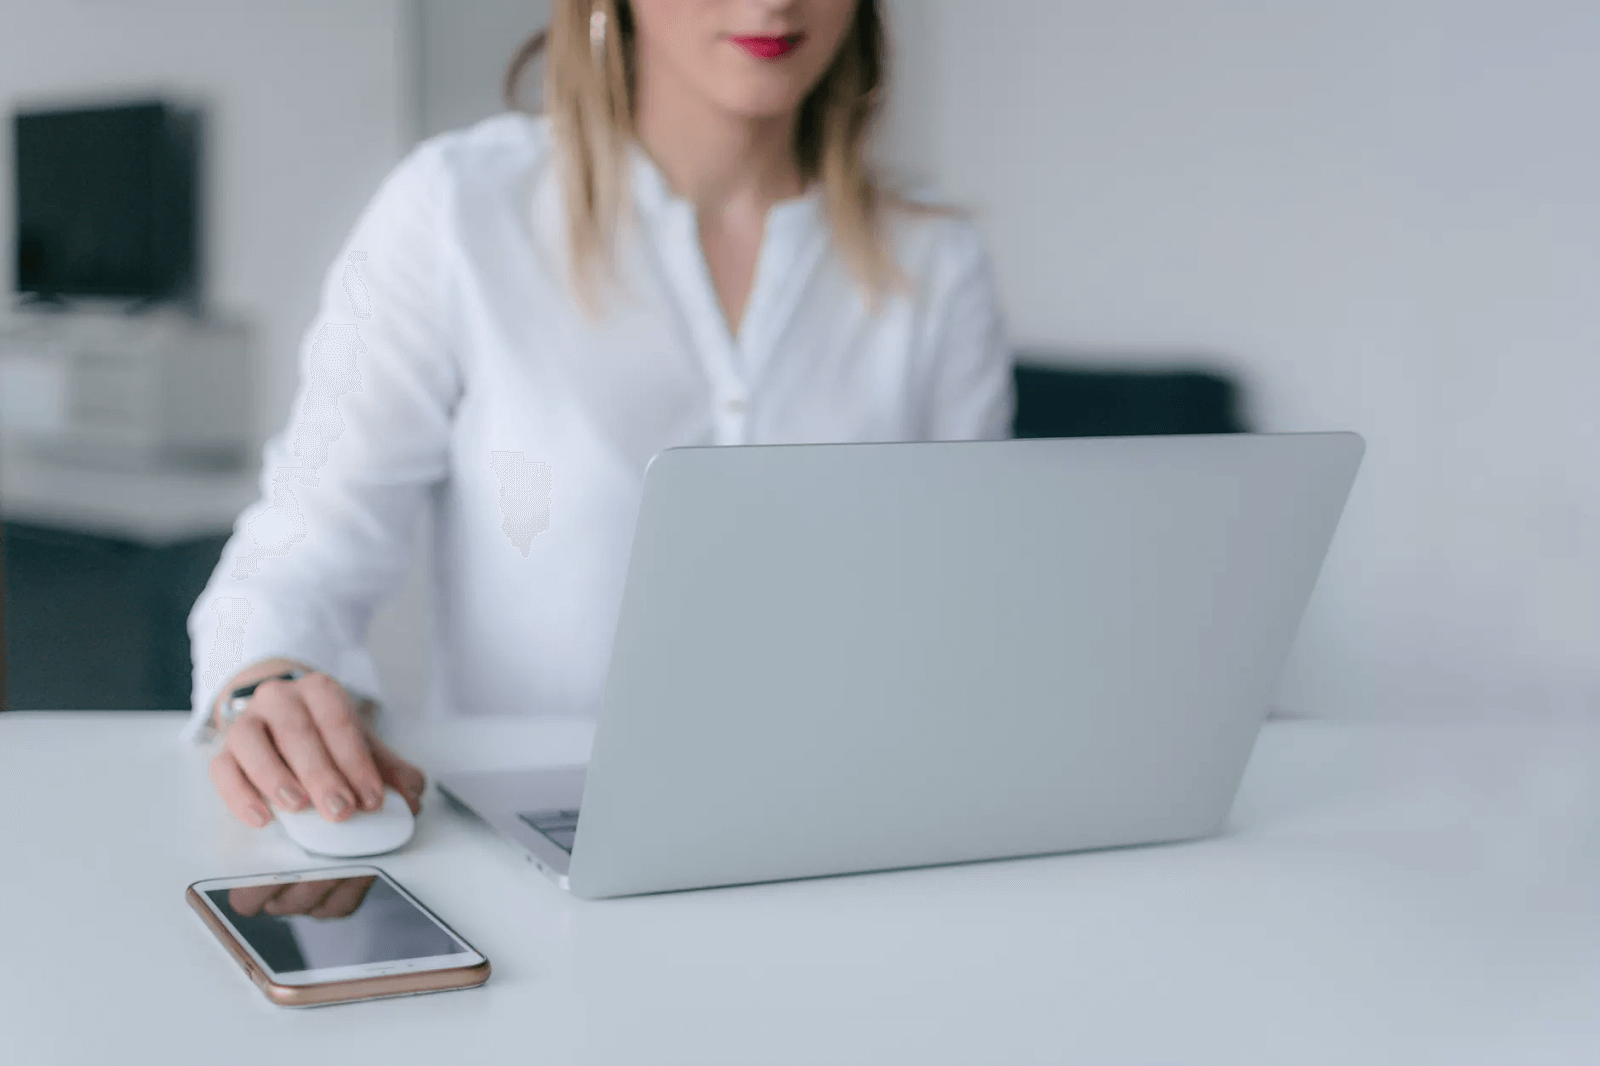 How to make quick money in one day: A woman works on her computer